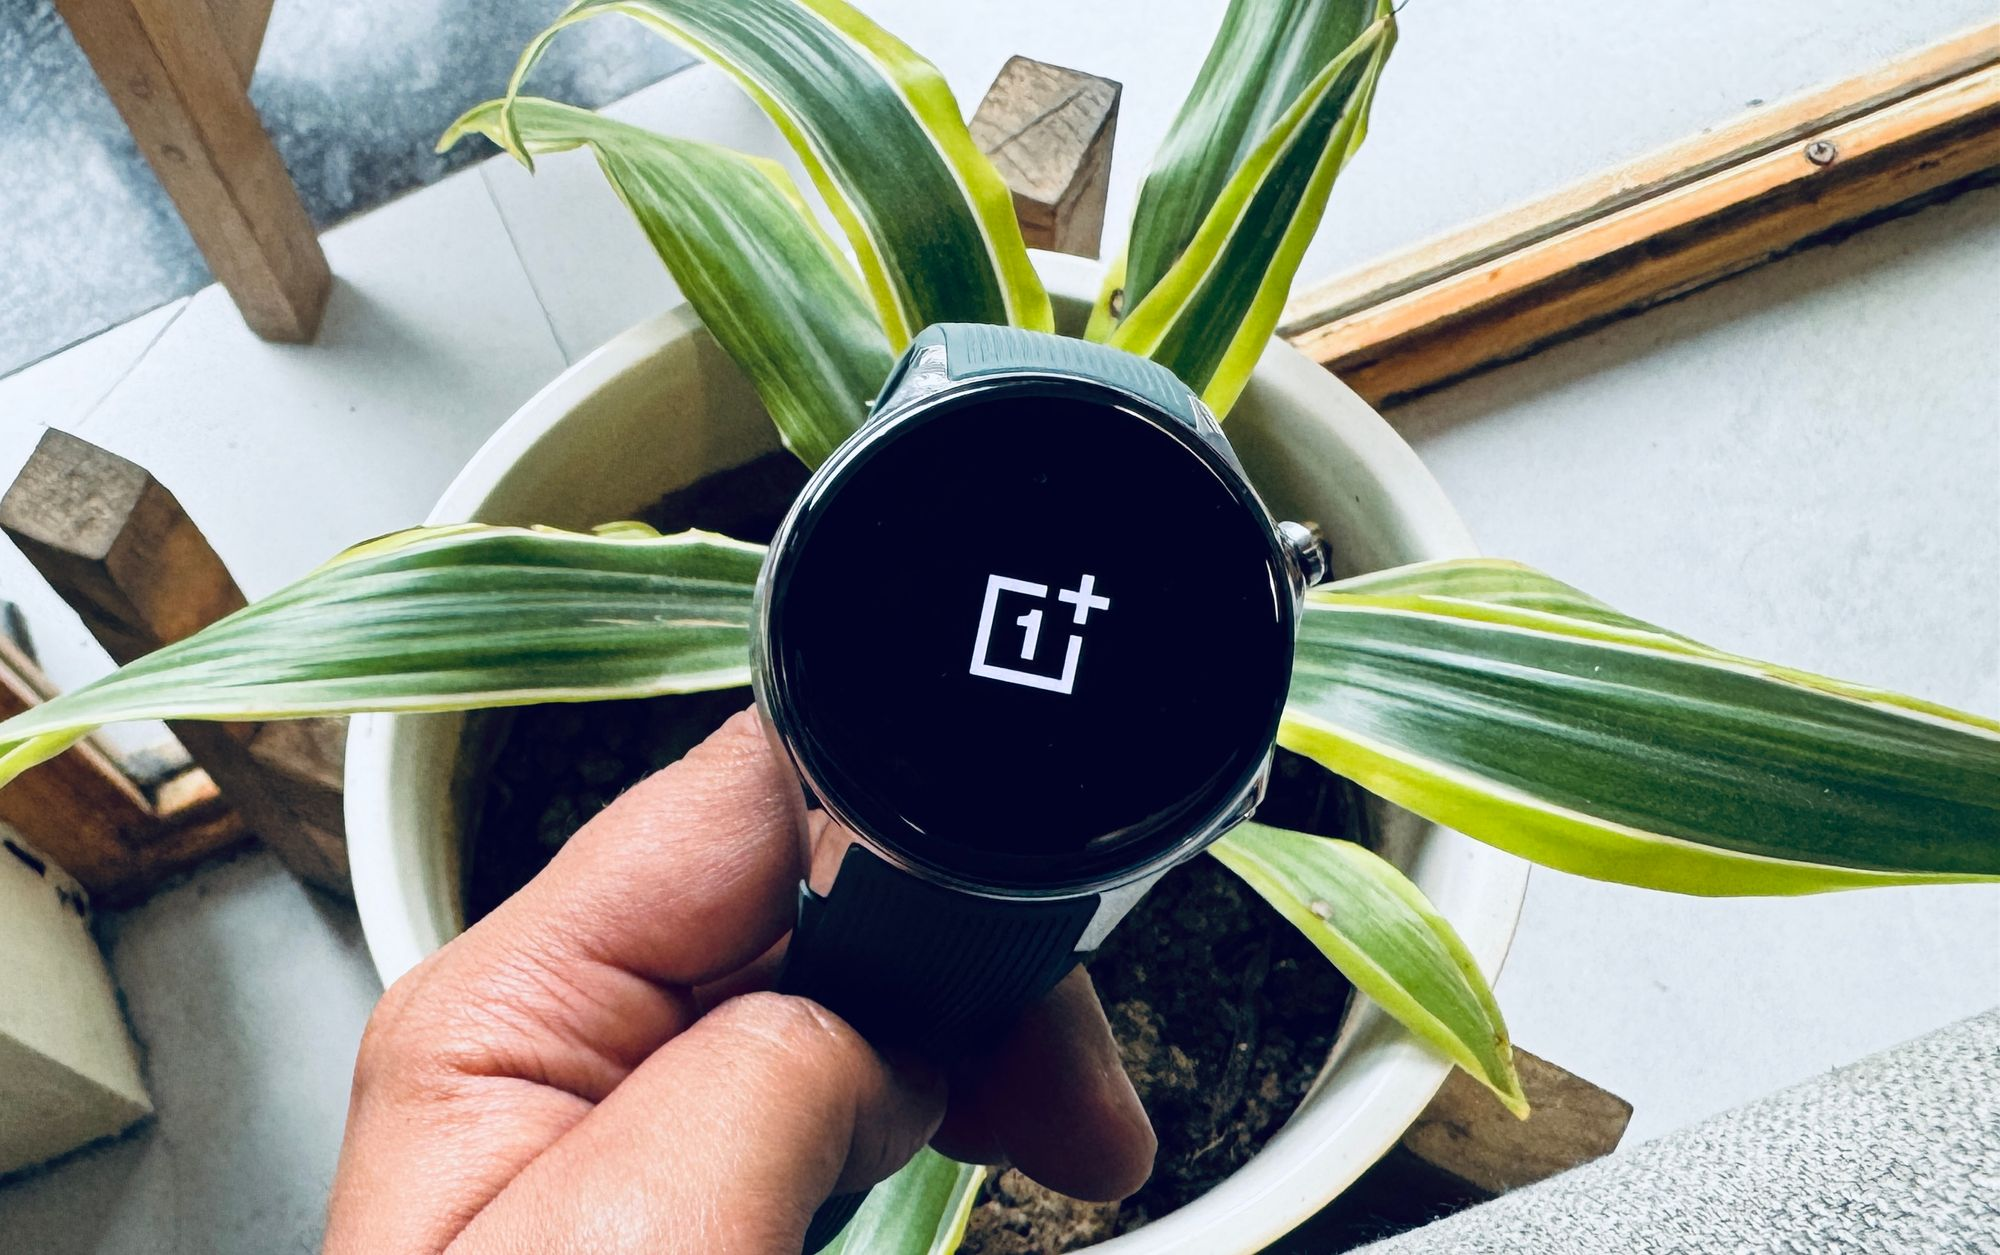 OnePlus Watch 2 held in hand against a plant